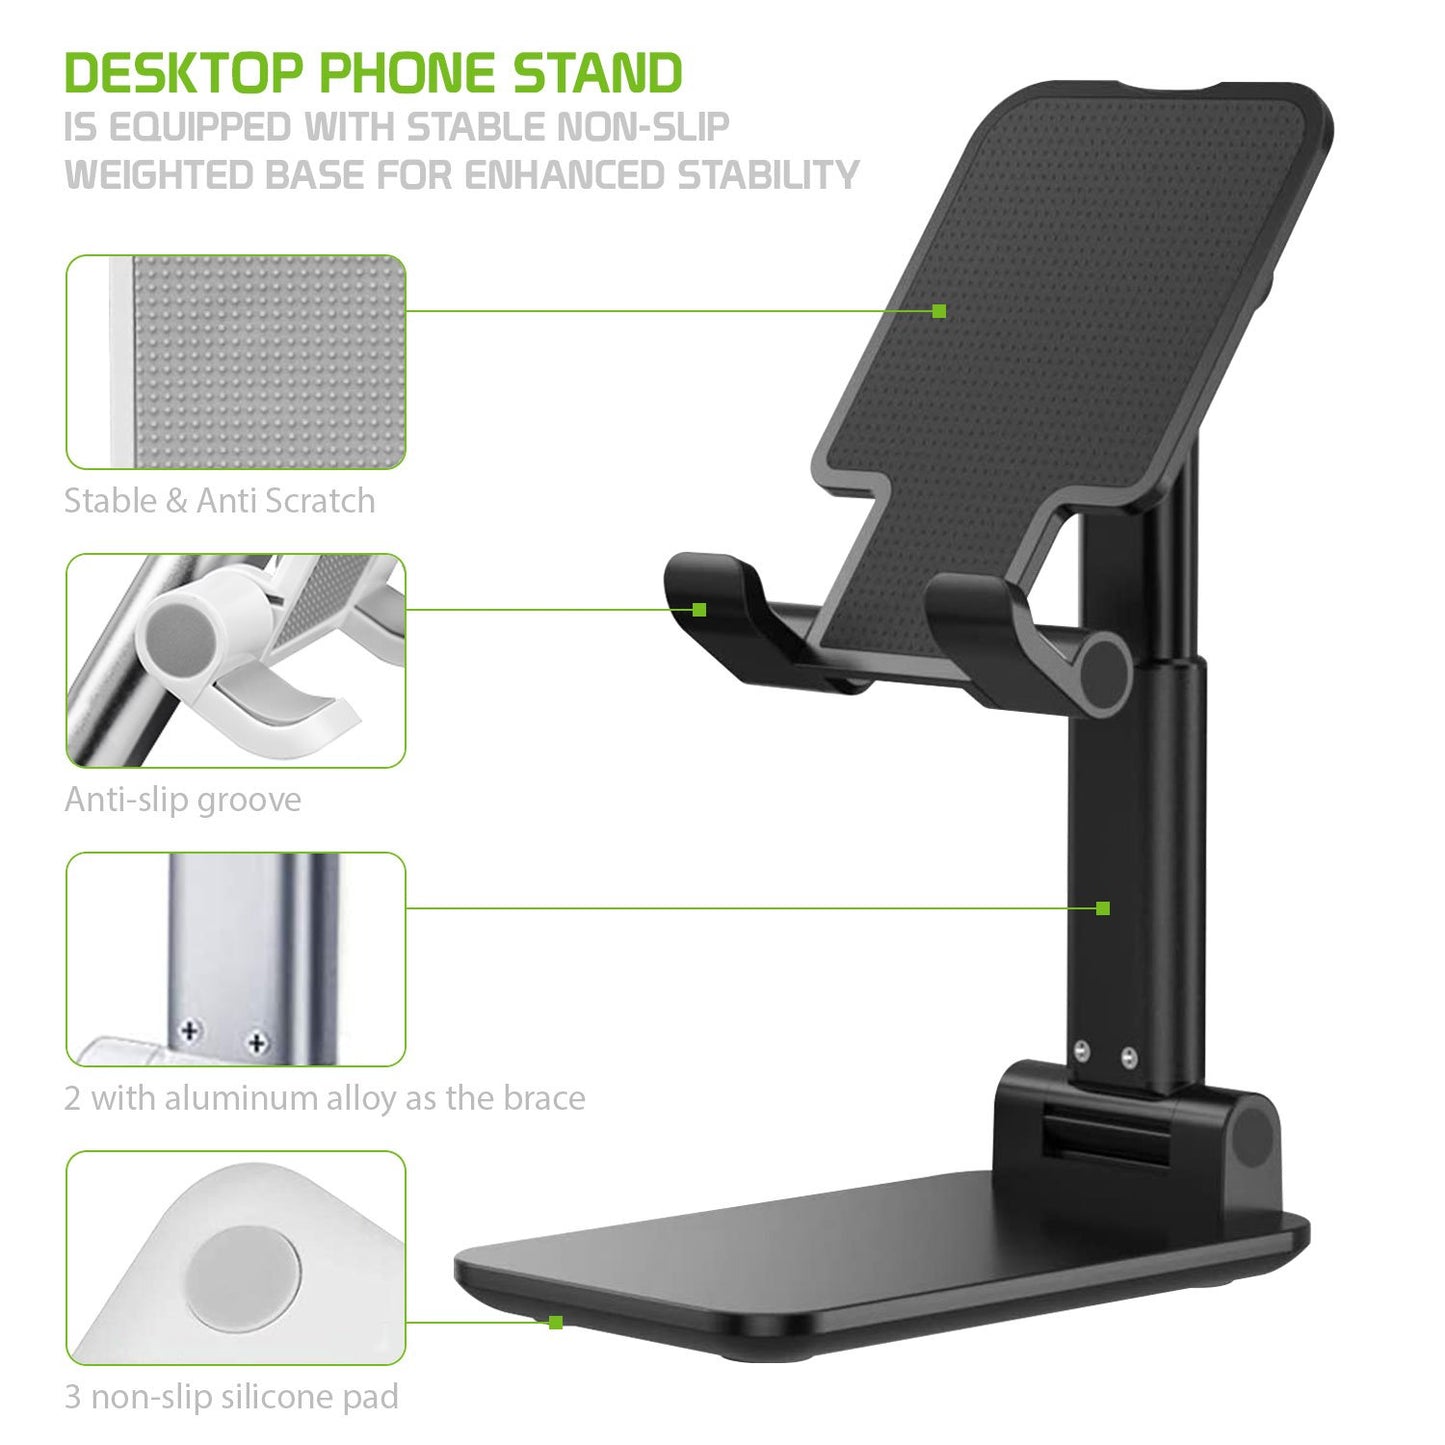 PH60WT - Adjustable Desktop Smartphone and Tablet Stand with Non-Slip Rubberized Grips and Weighted Base Compatible to Smartphones, Tablets, iPads